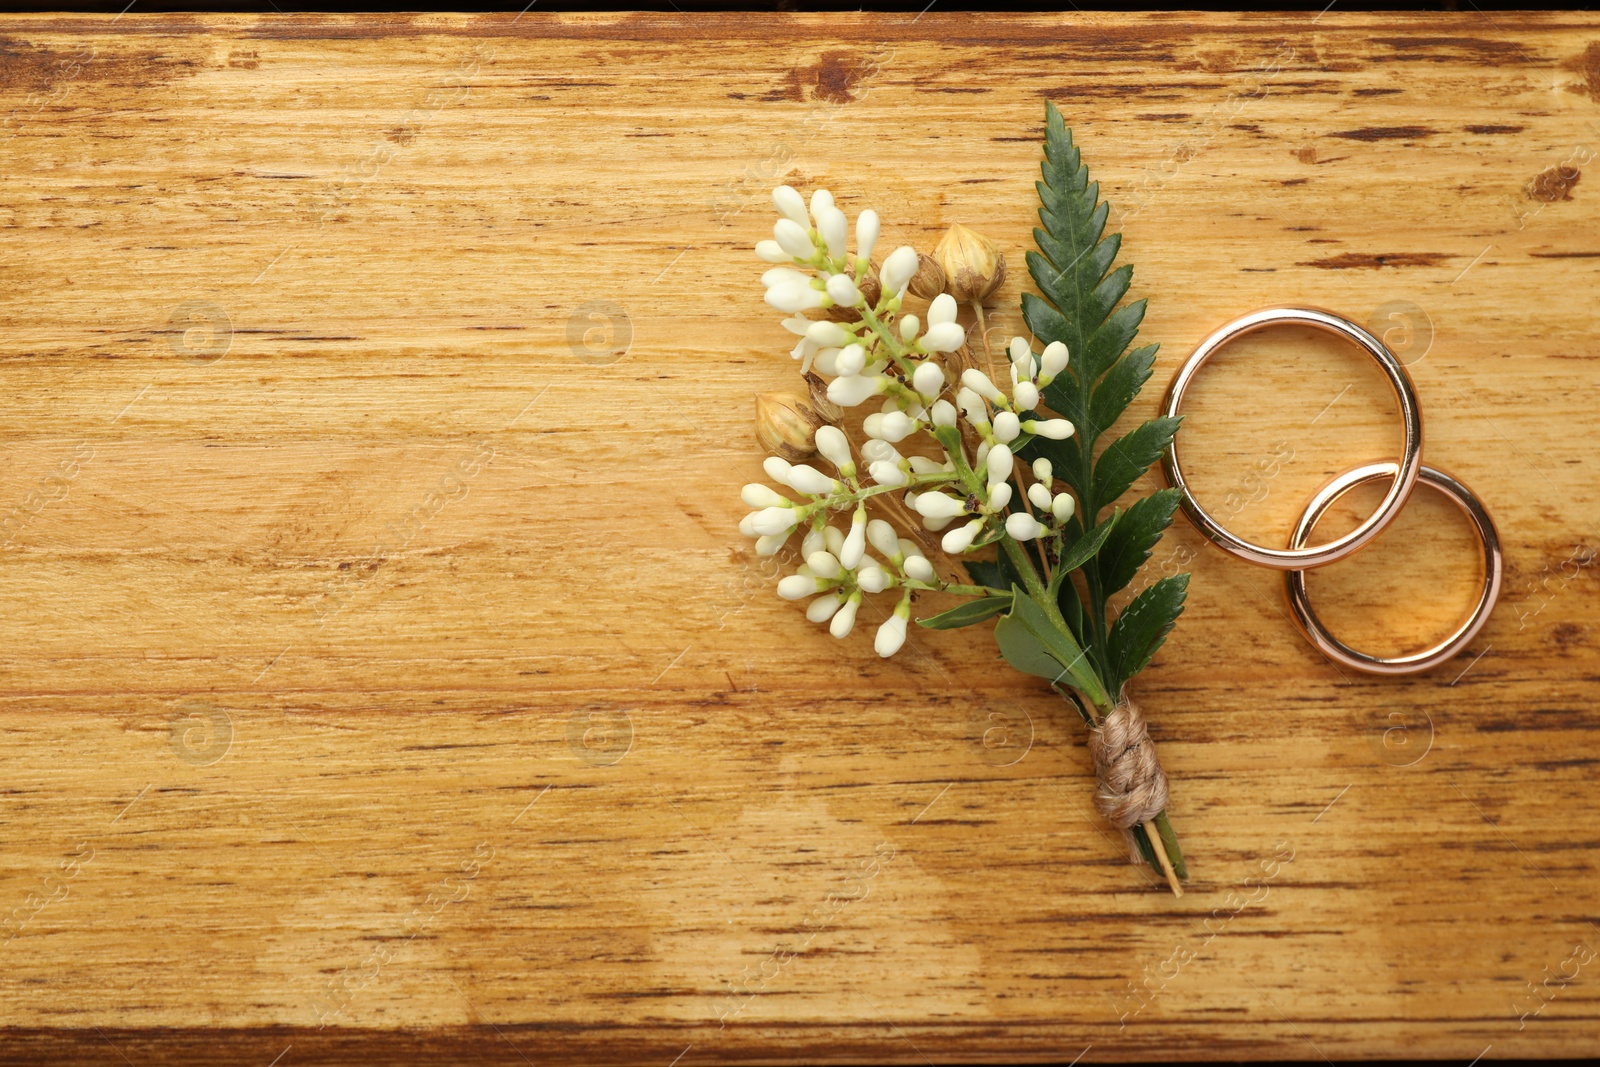 Photo of Small stylish boutonniere and rings on wooden table, flat lay. Space for text